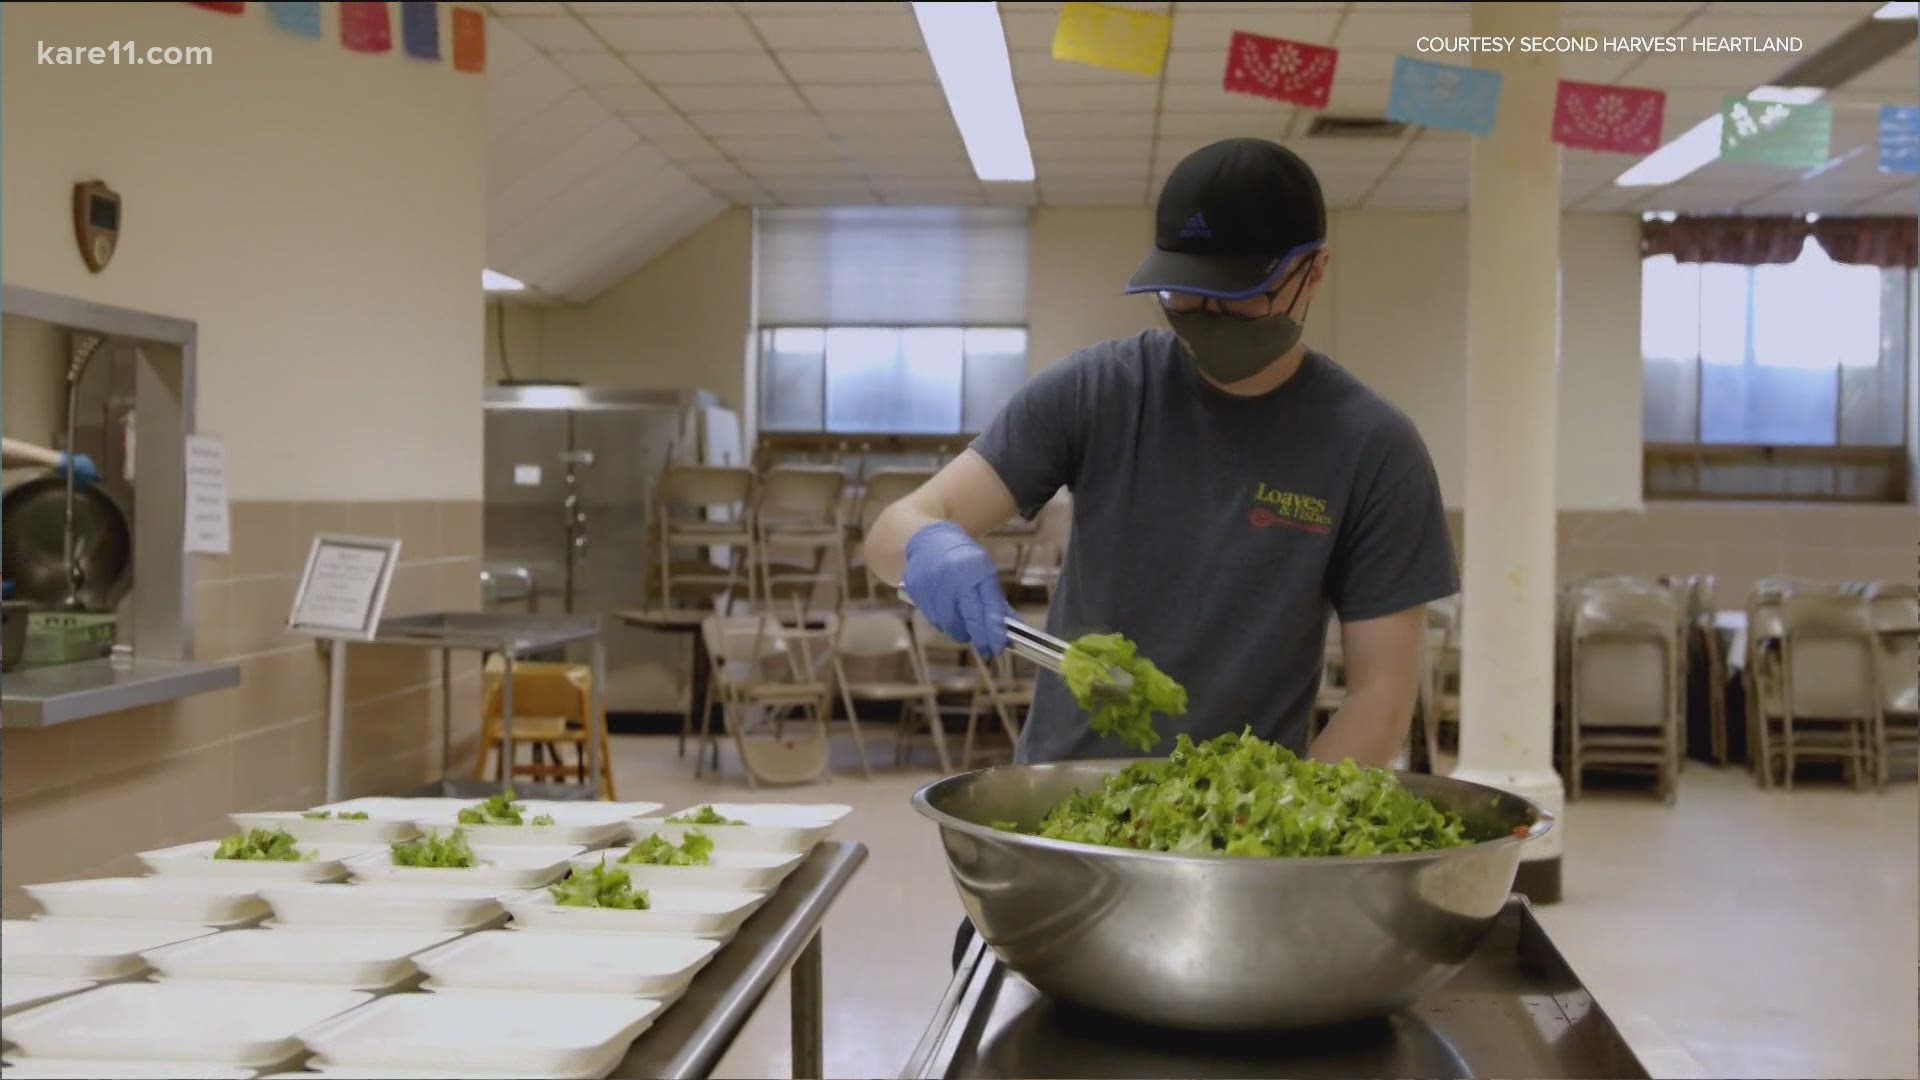 Minnesota Central Kitchen aims to feed people who are hungry in the pandemic, and keep restaurant kitchens open.